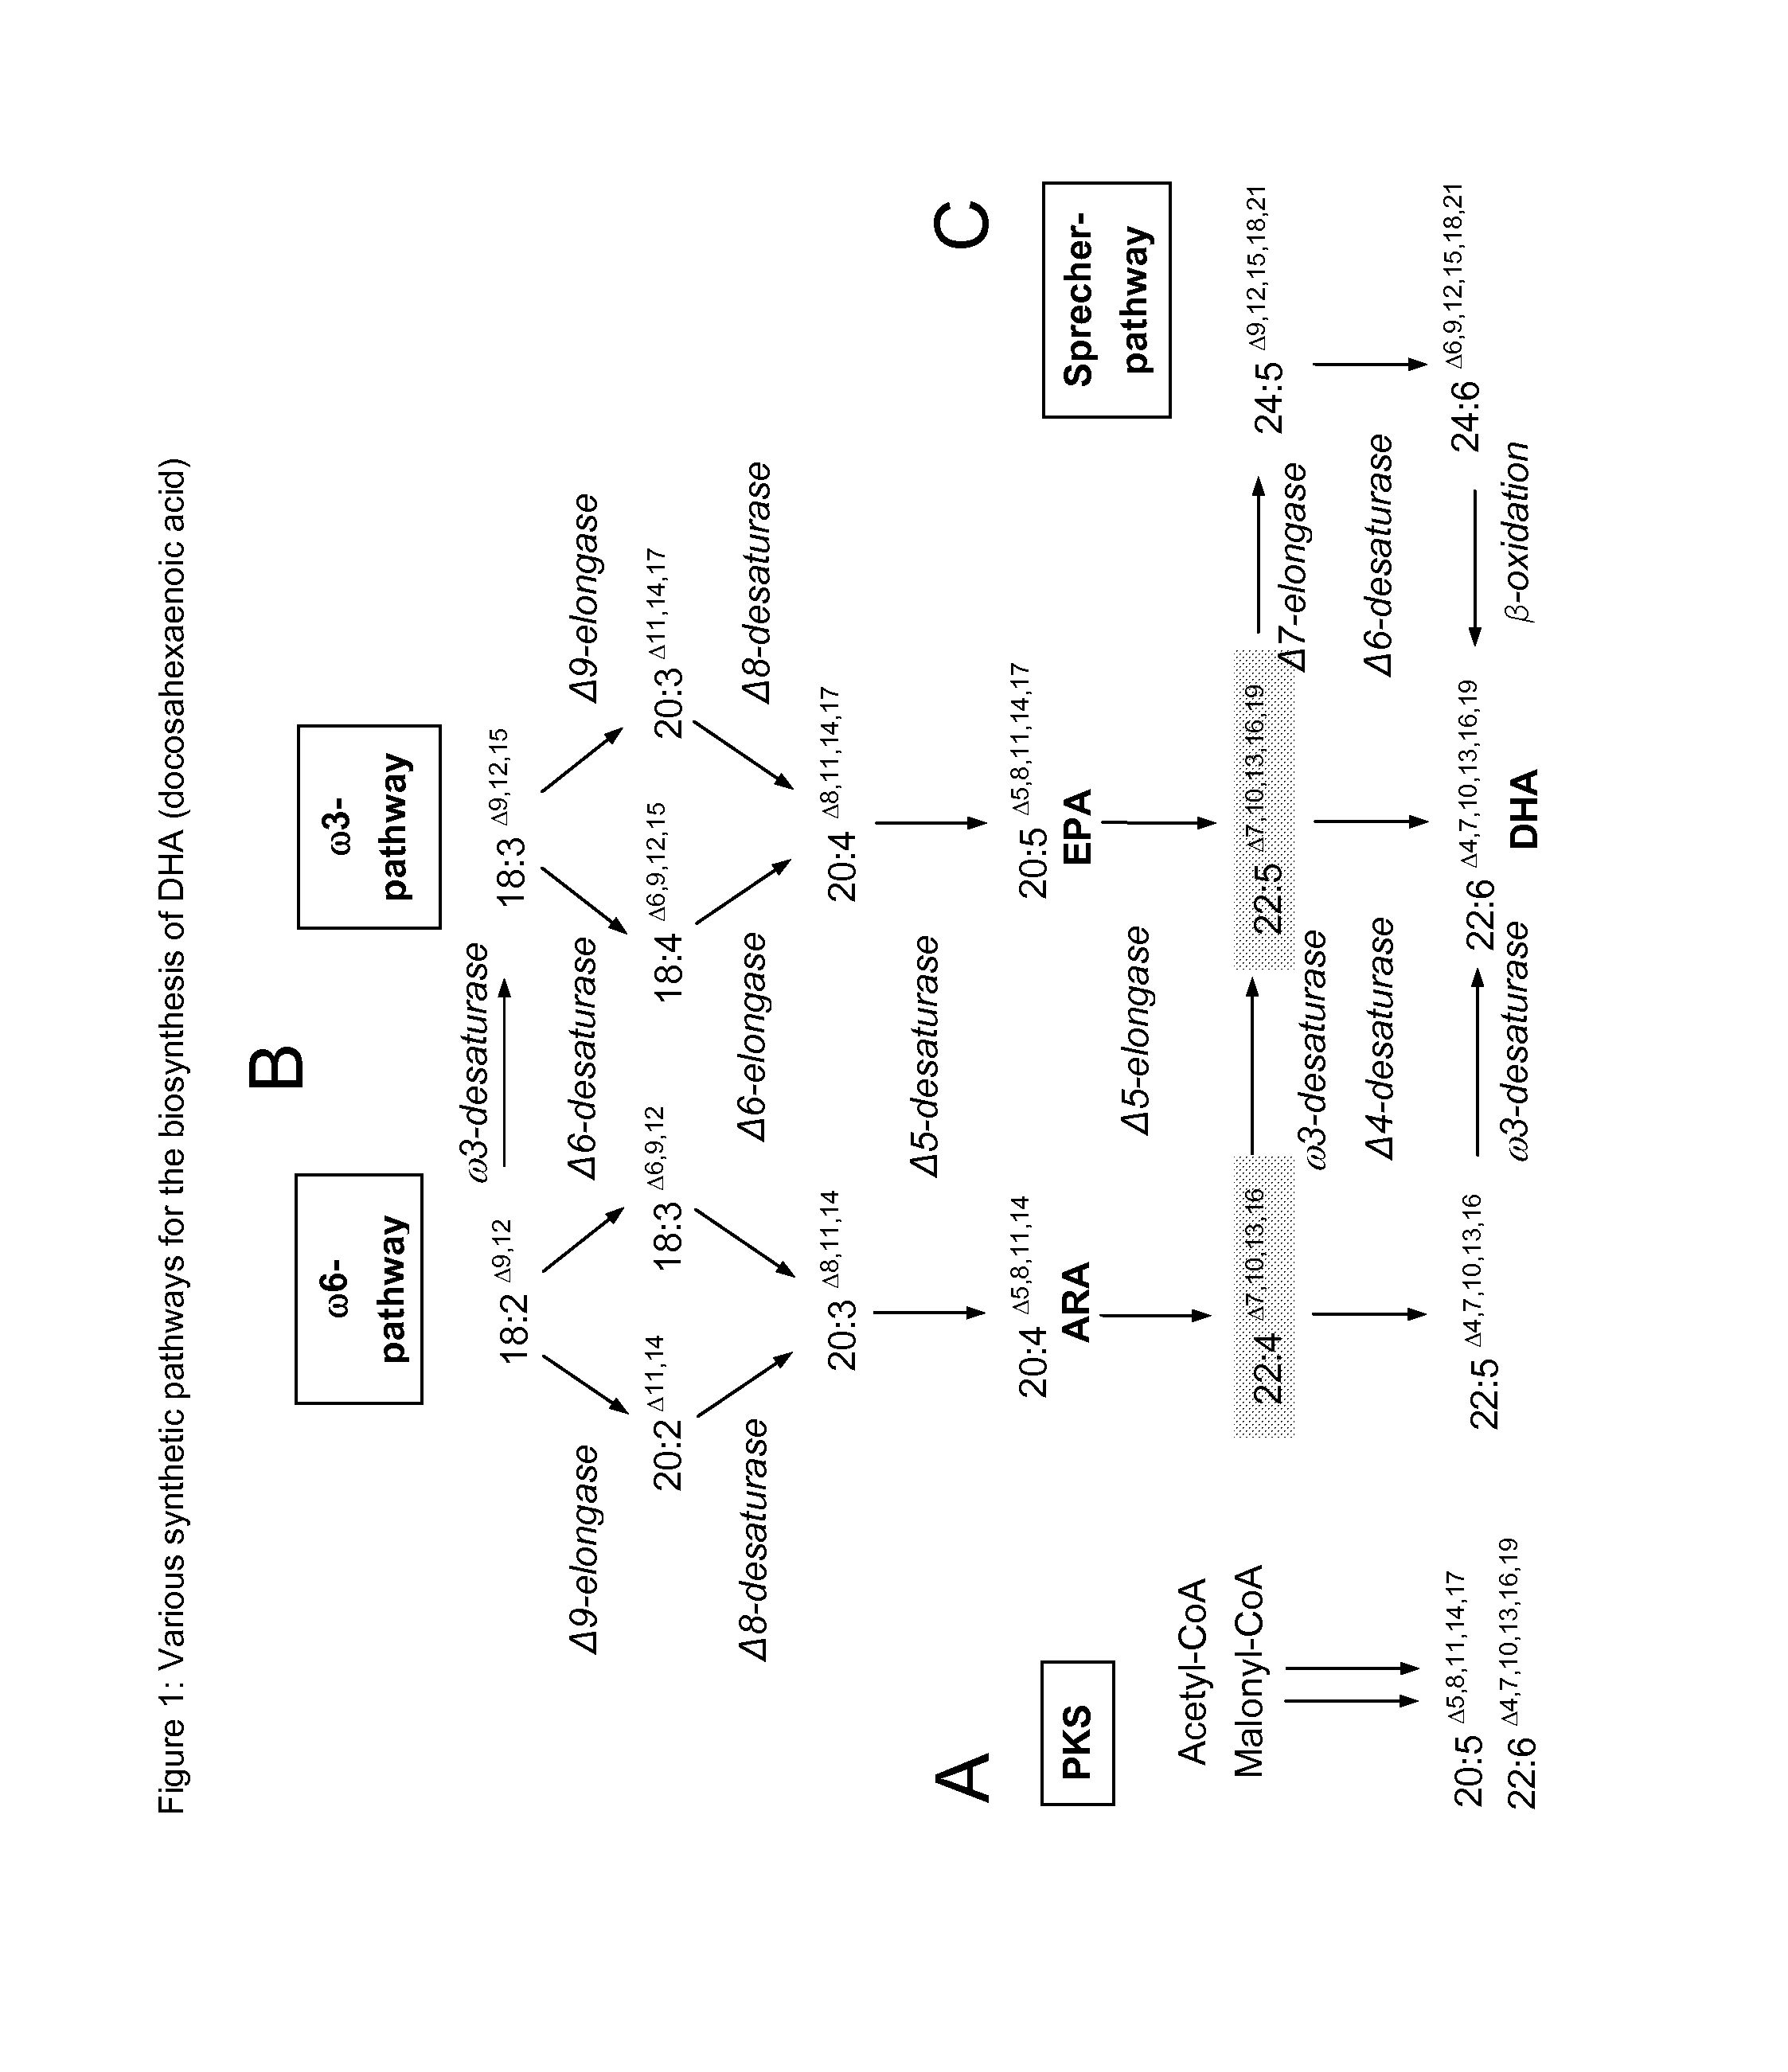 Method for producing polyunsaturated fatty acids in transgenic plants